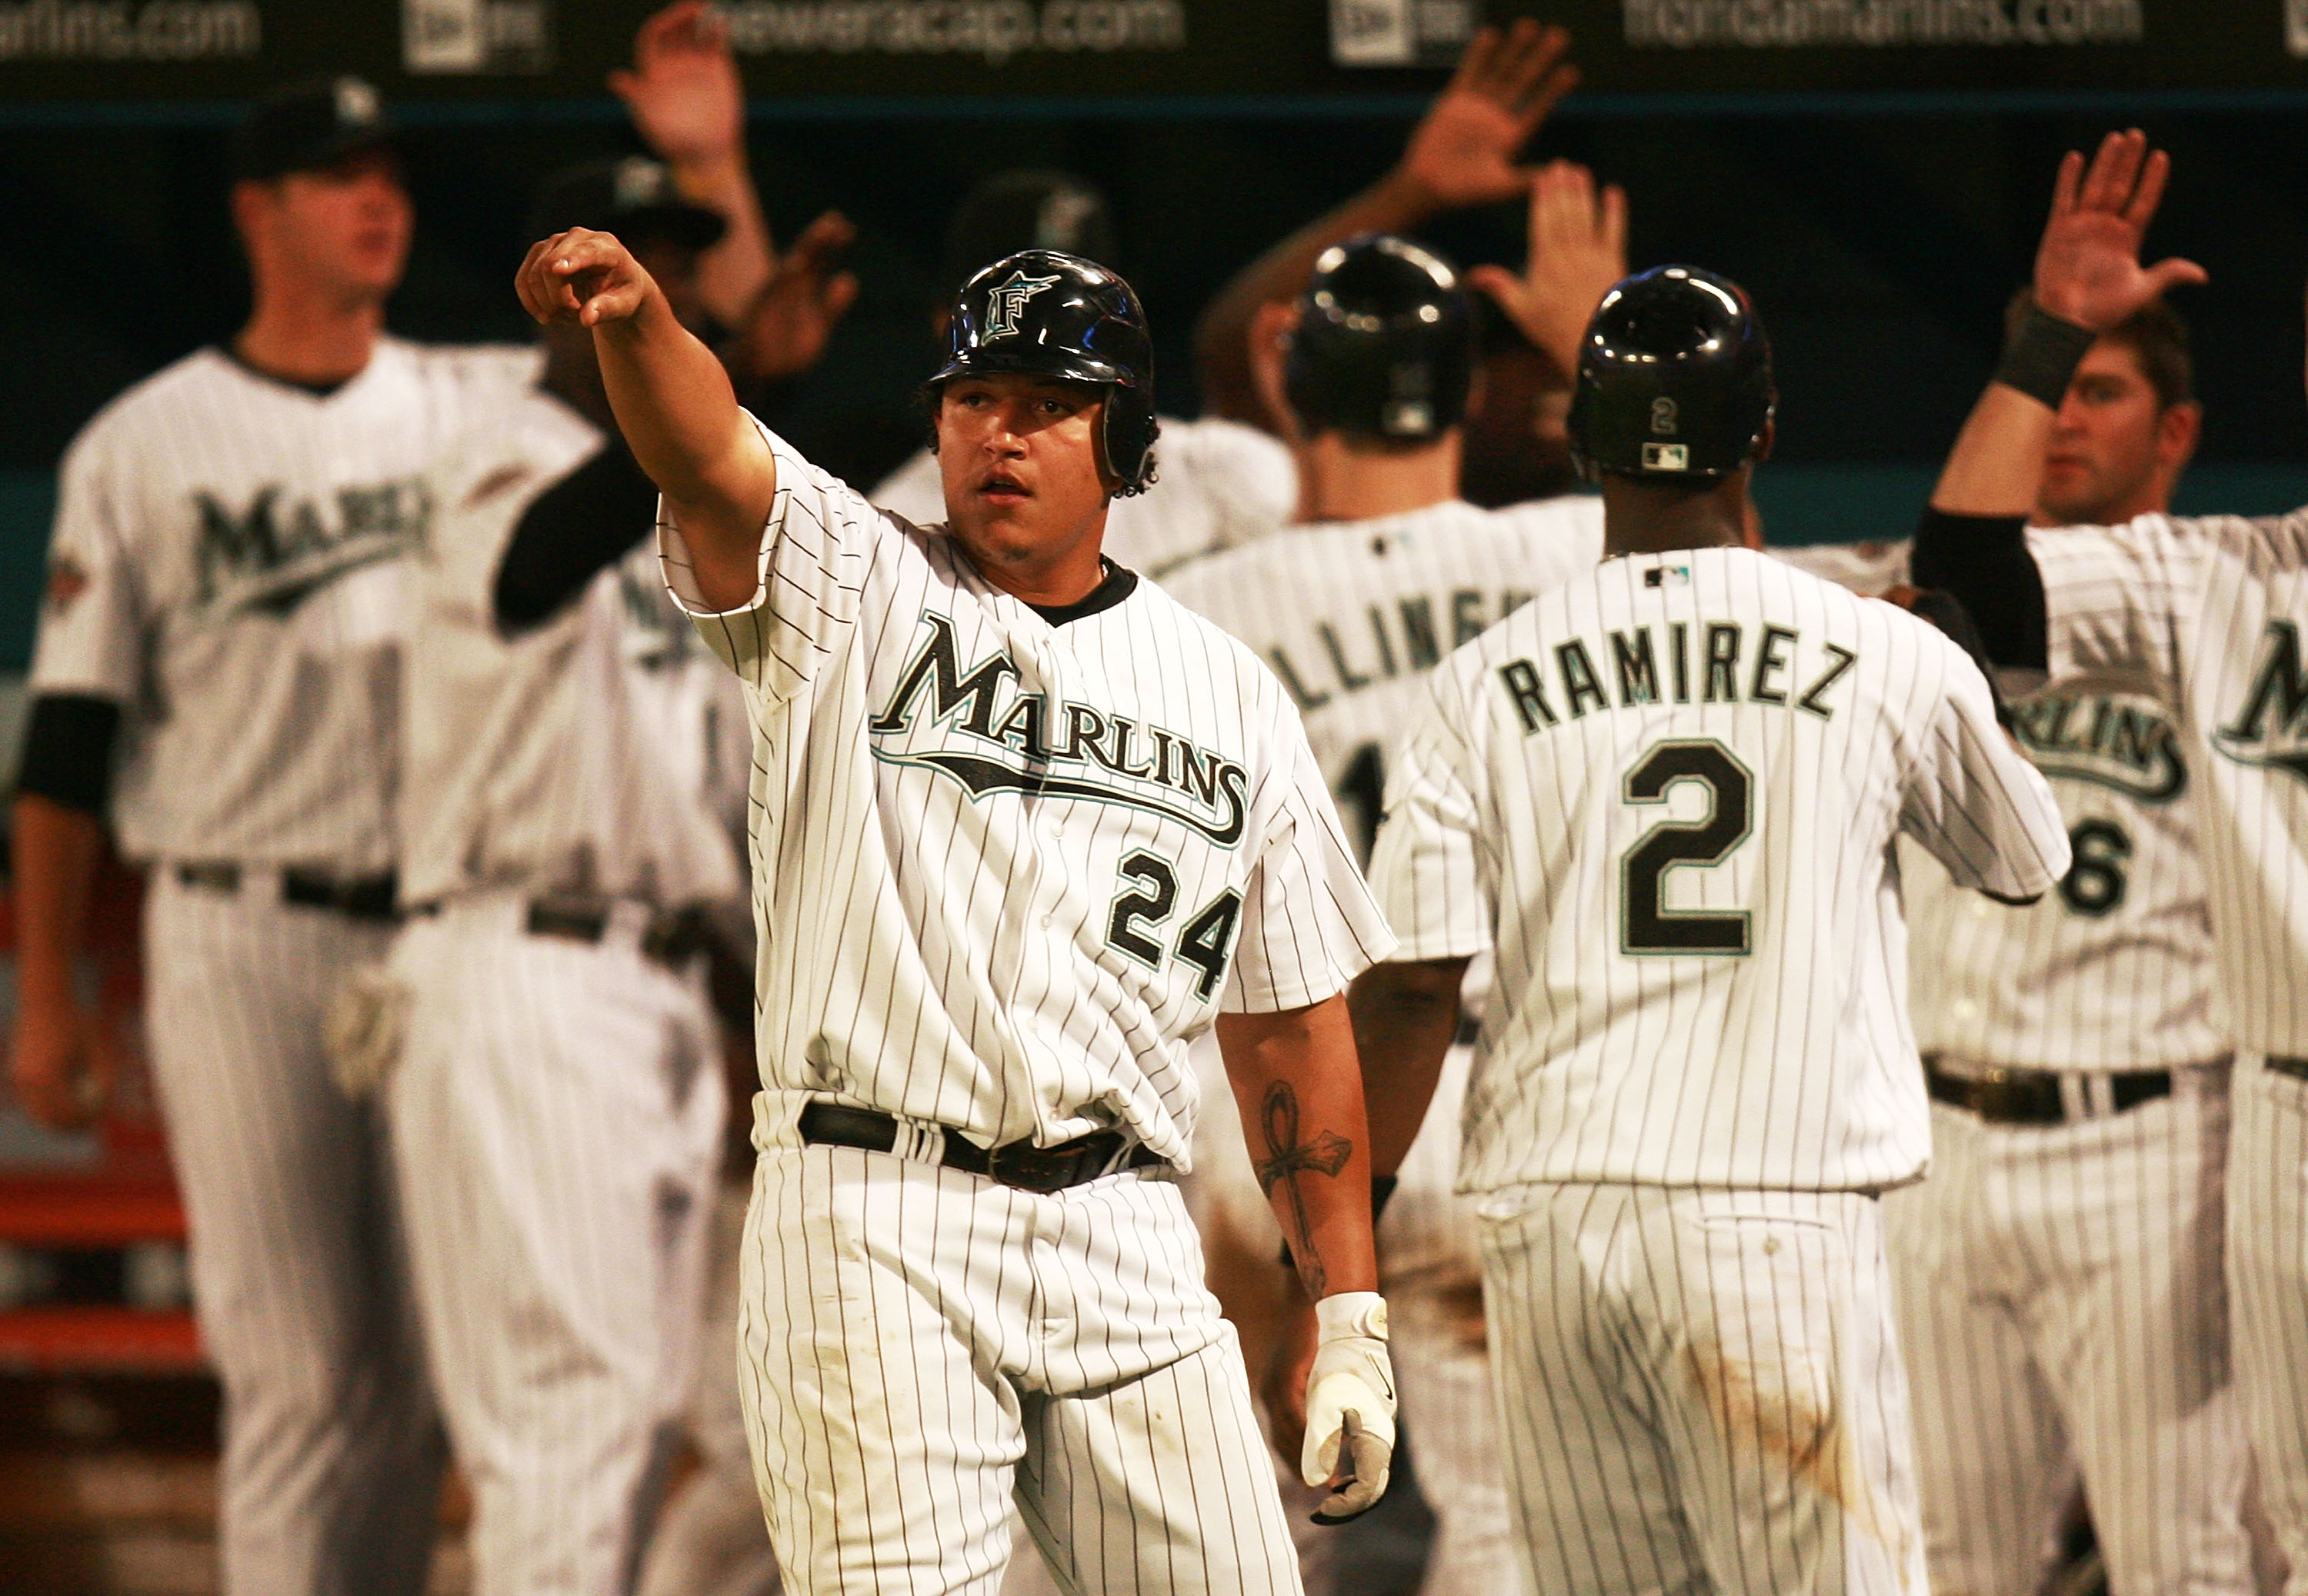 Miguel Cabrera #24 of the Florida Marlins points toward teammate Miguel Olivo #30 after Olivo hit a three-run double in the seventh inning against the Cleveland Indians during interleague play at Dolphin Stadium on June12, 2007 in Miami, Florida.